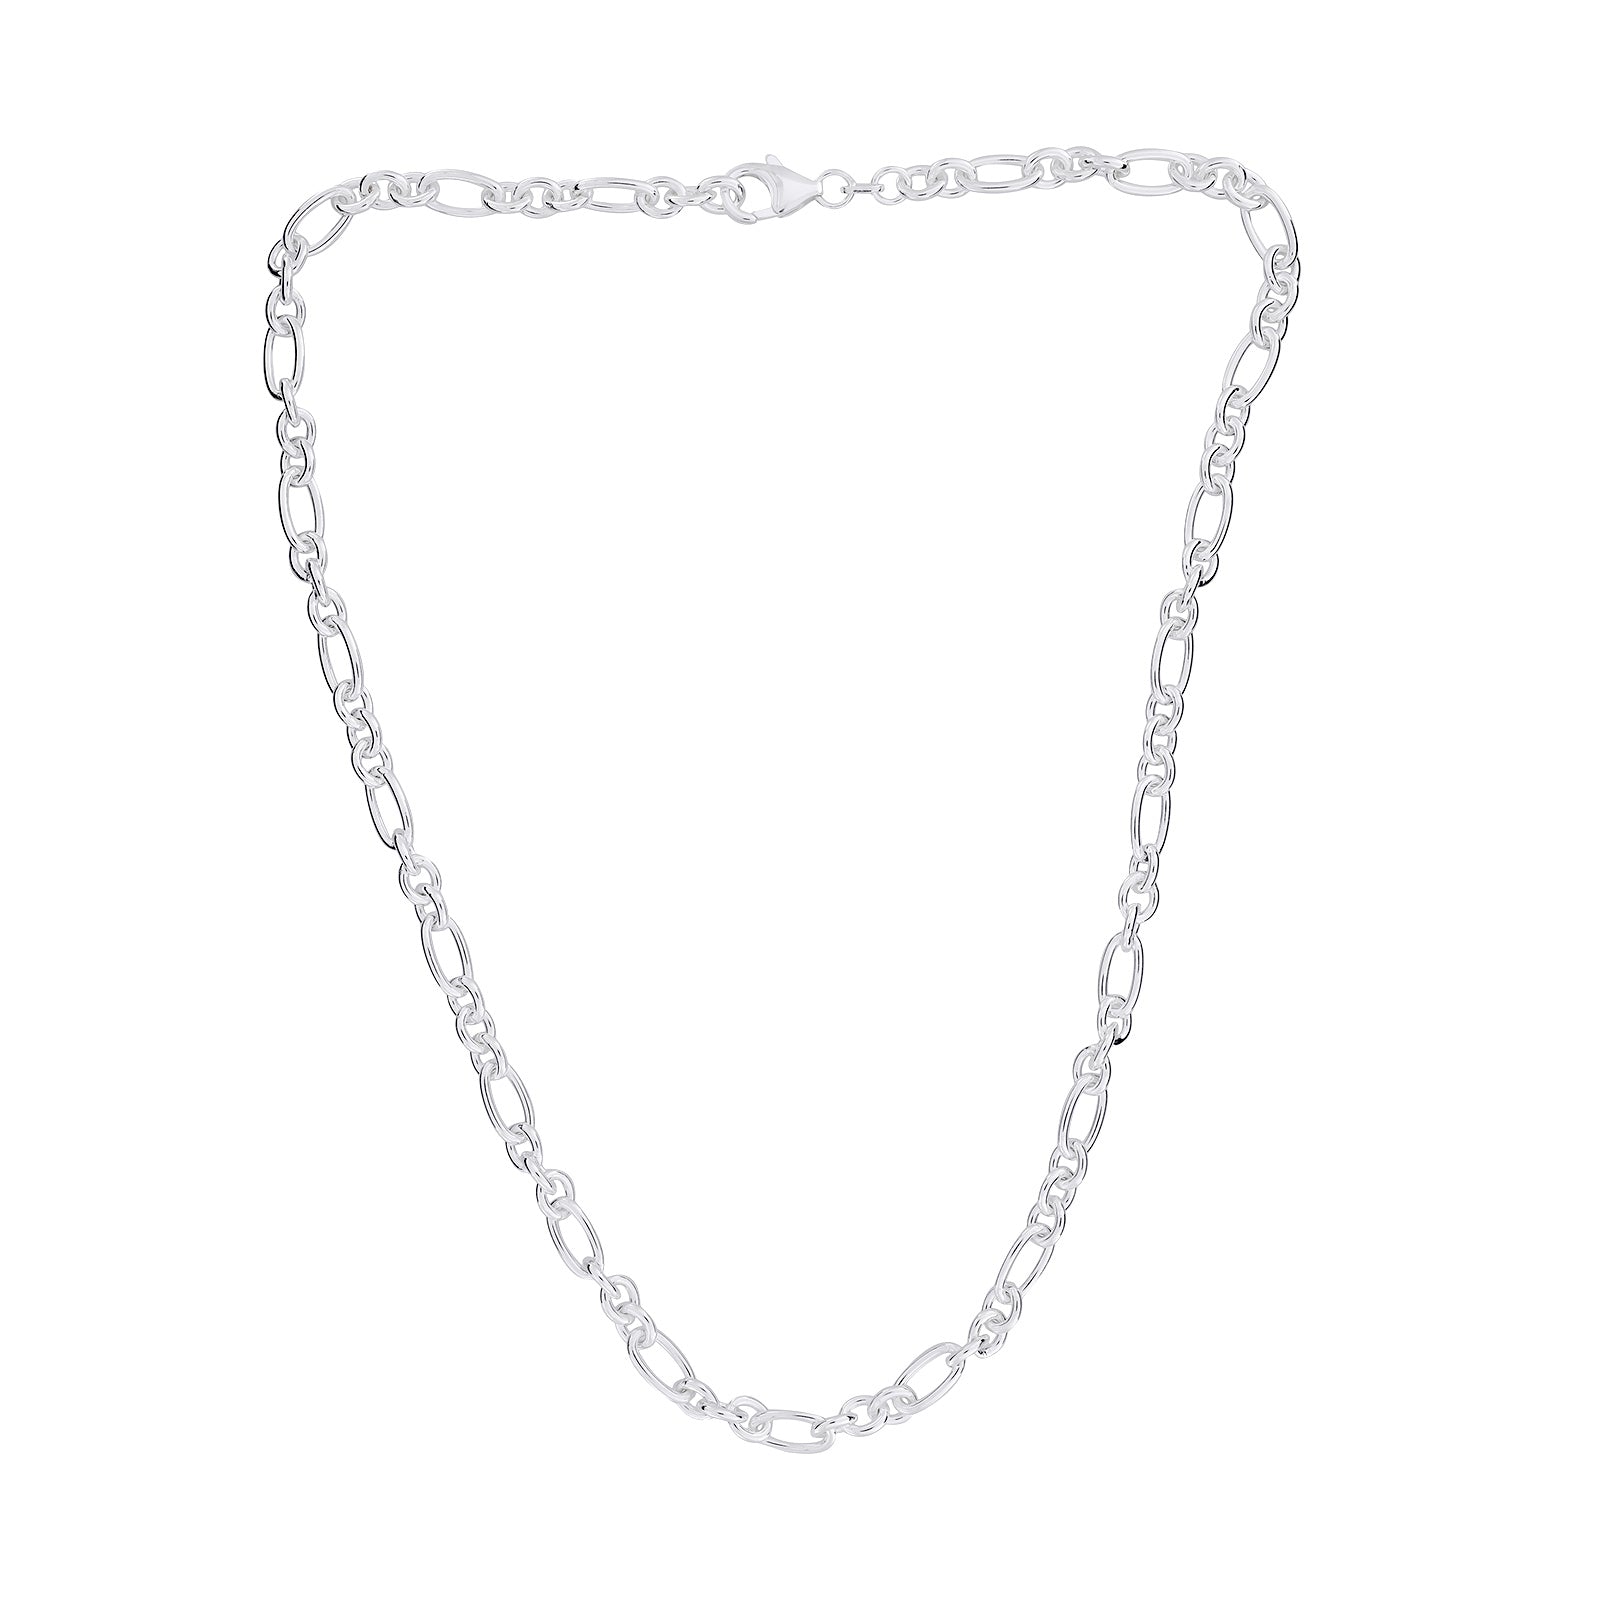 Silver Oval Links Necklace